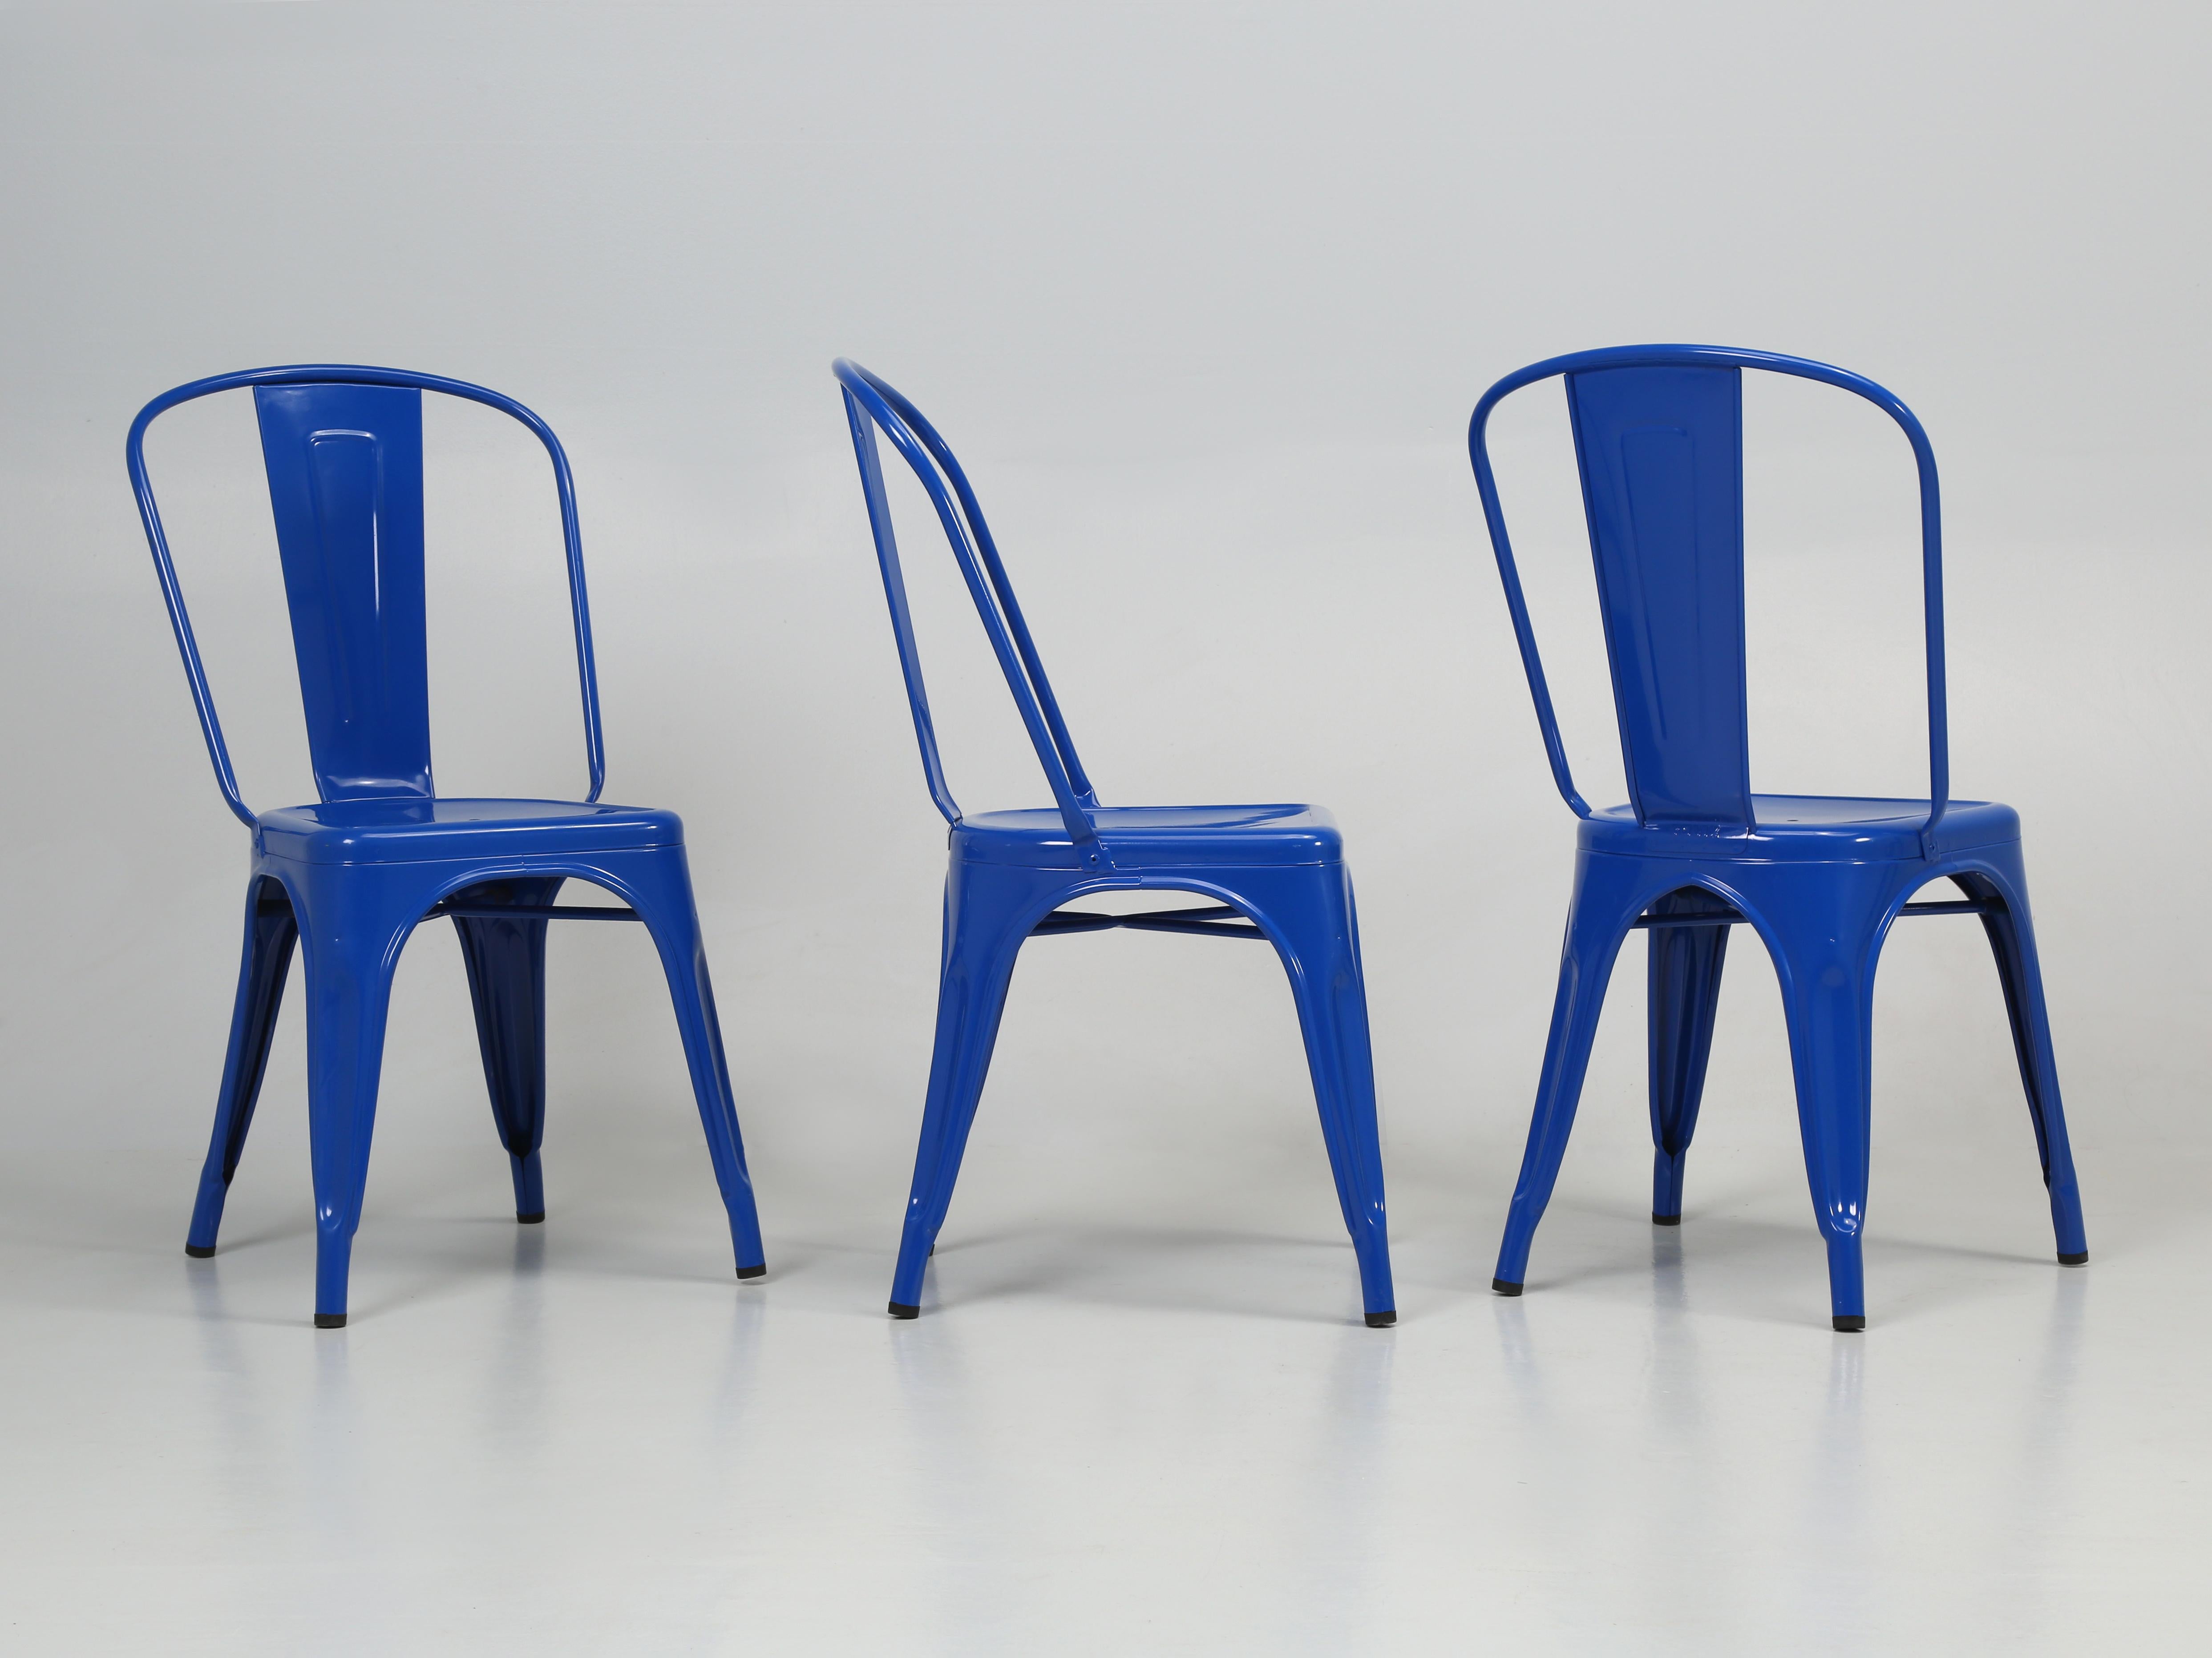 Genuine Tolix Steel stacking chairs originally designed by Xavier Pauchard around the early 1900s. Mr. Pauchard invented a process for protecting metal from rusting. The now famous Tolix Steel Stacking chairs and Steel Stacking Stools did not start